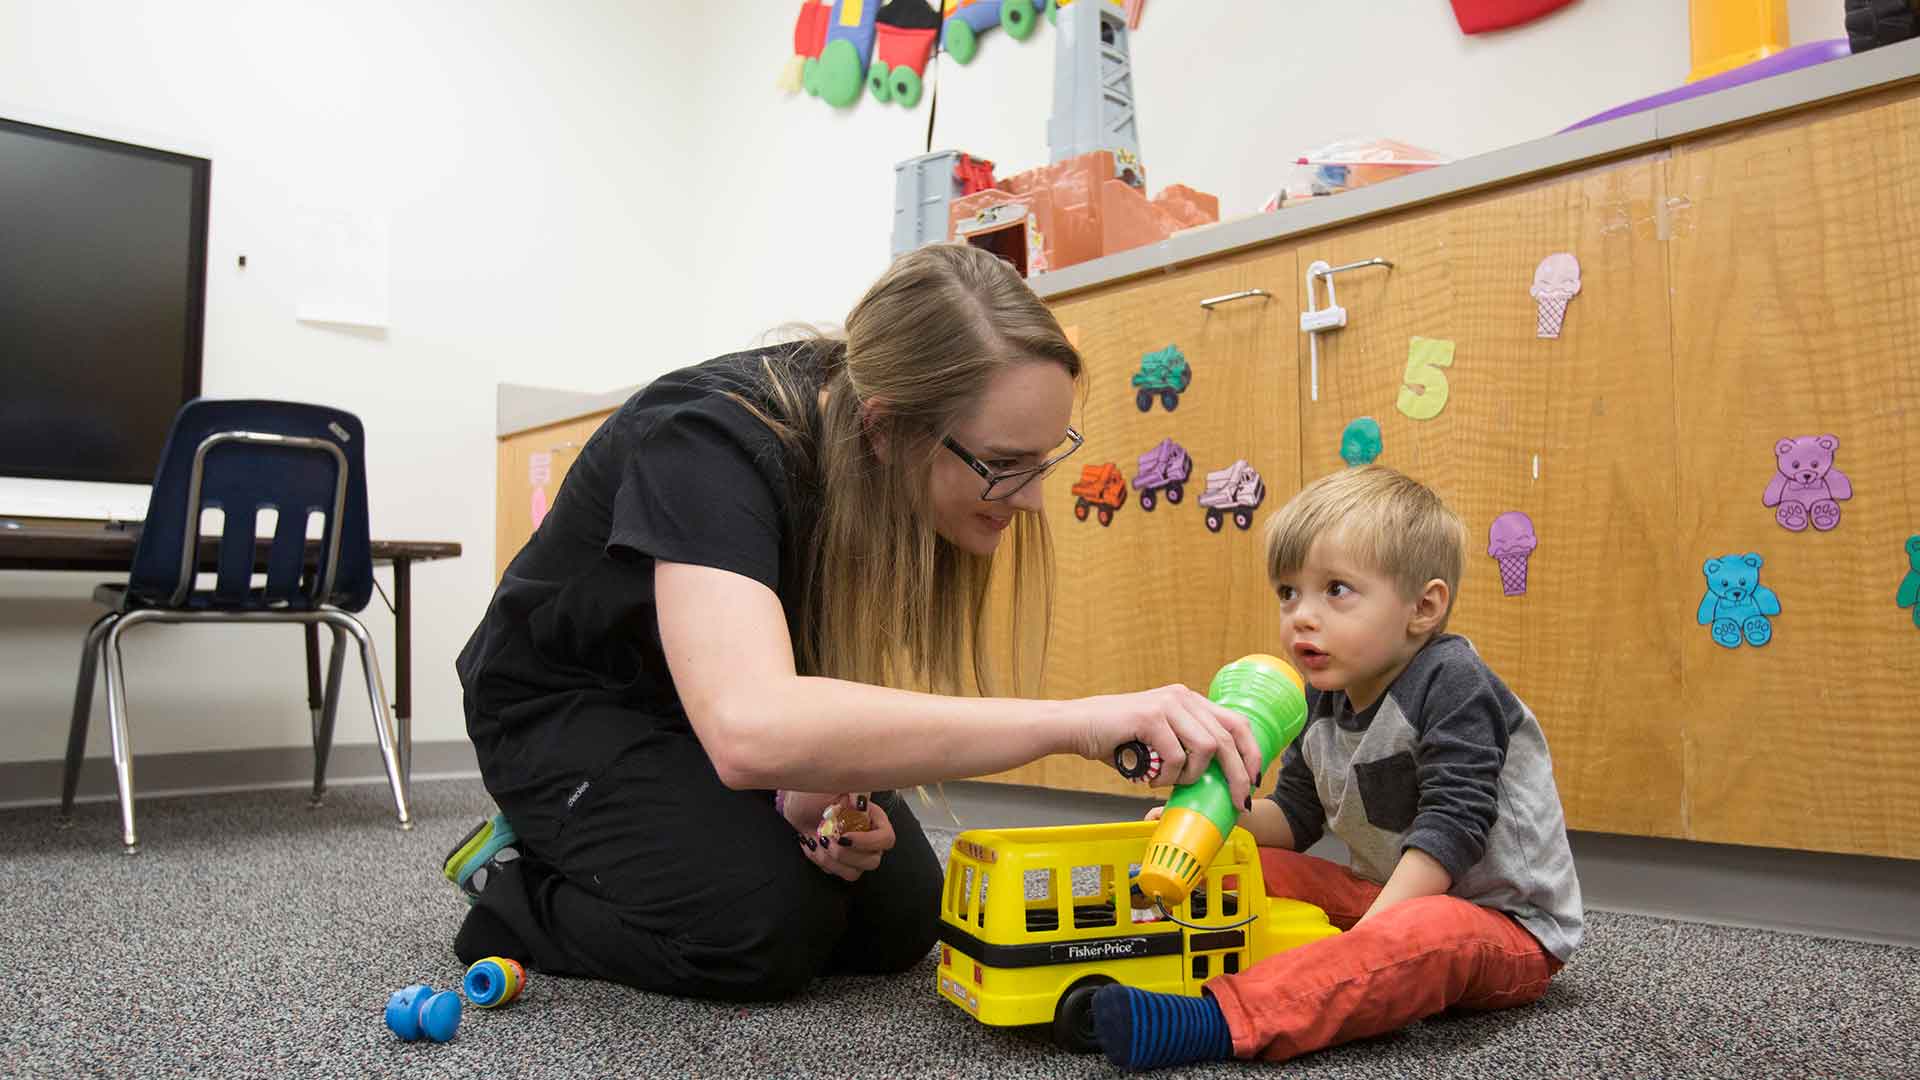 A speech-language student does a therapy session with a young child in a play area.